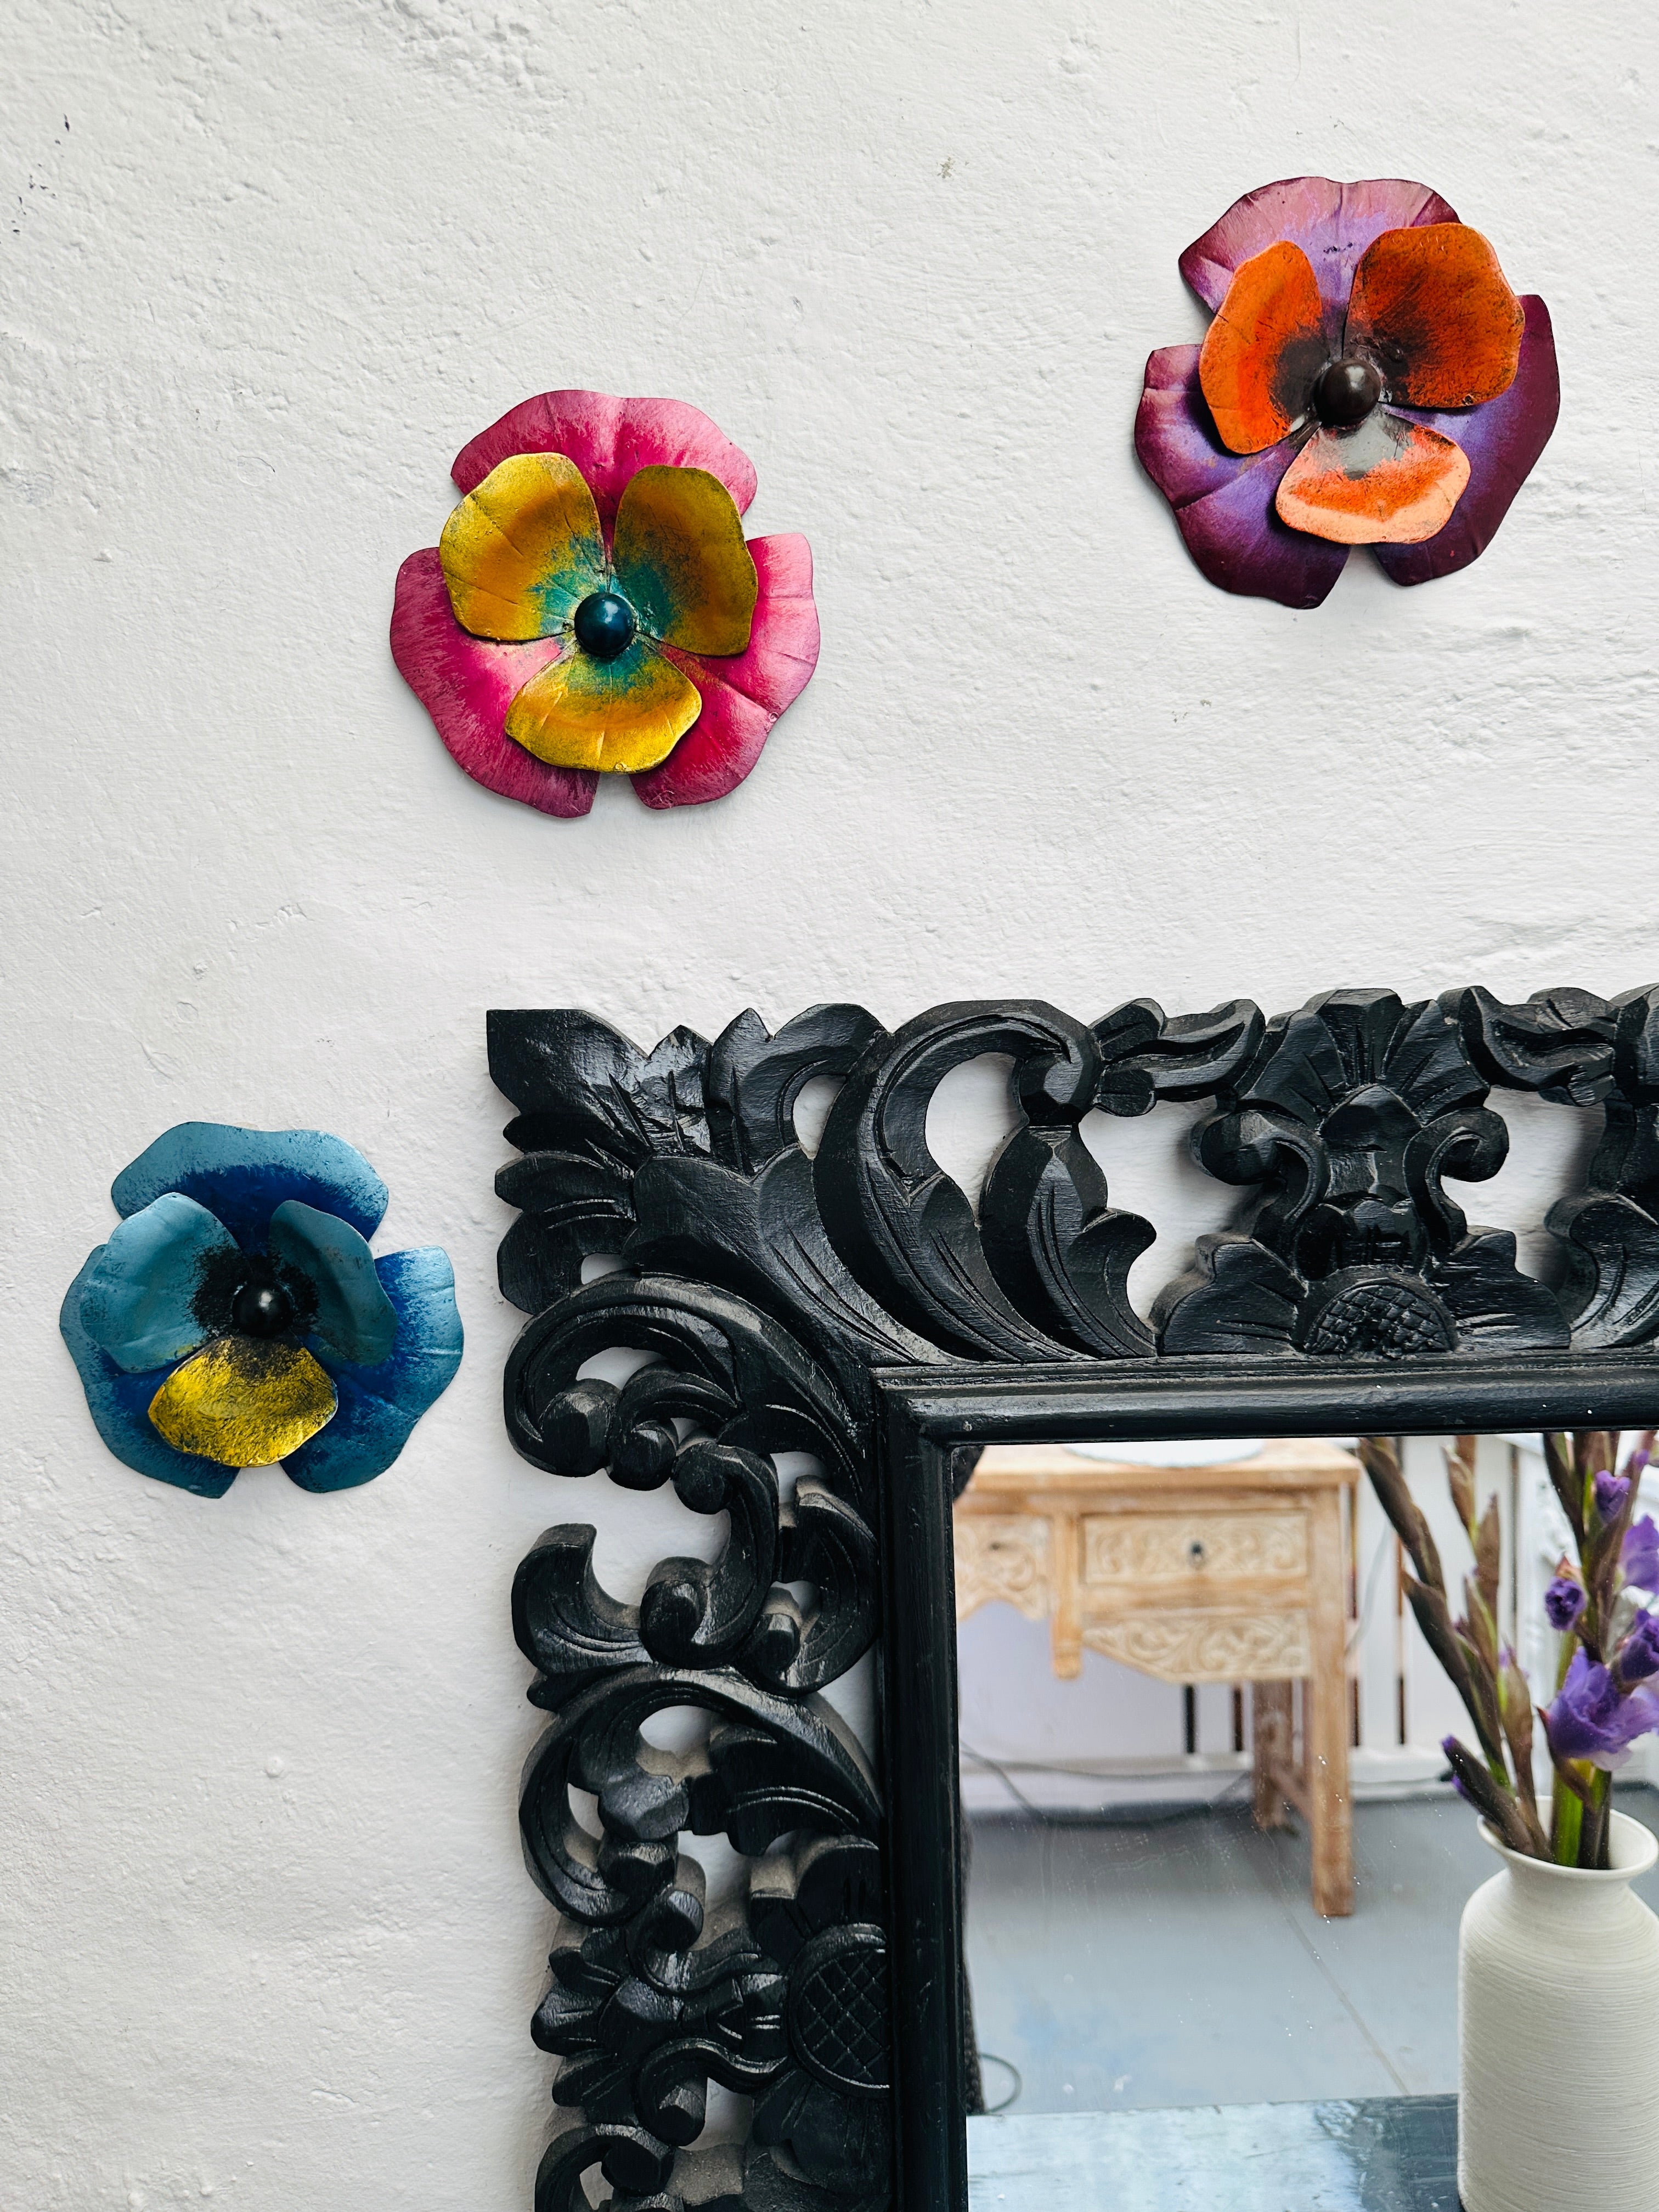 display view of pansy flowers attached to wall